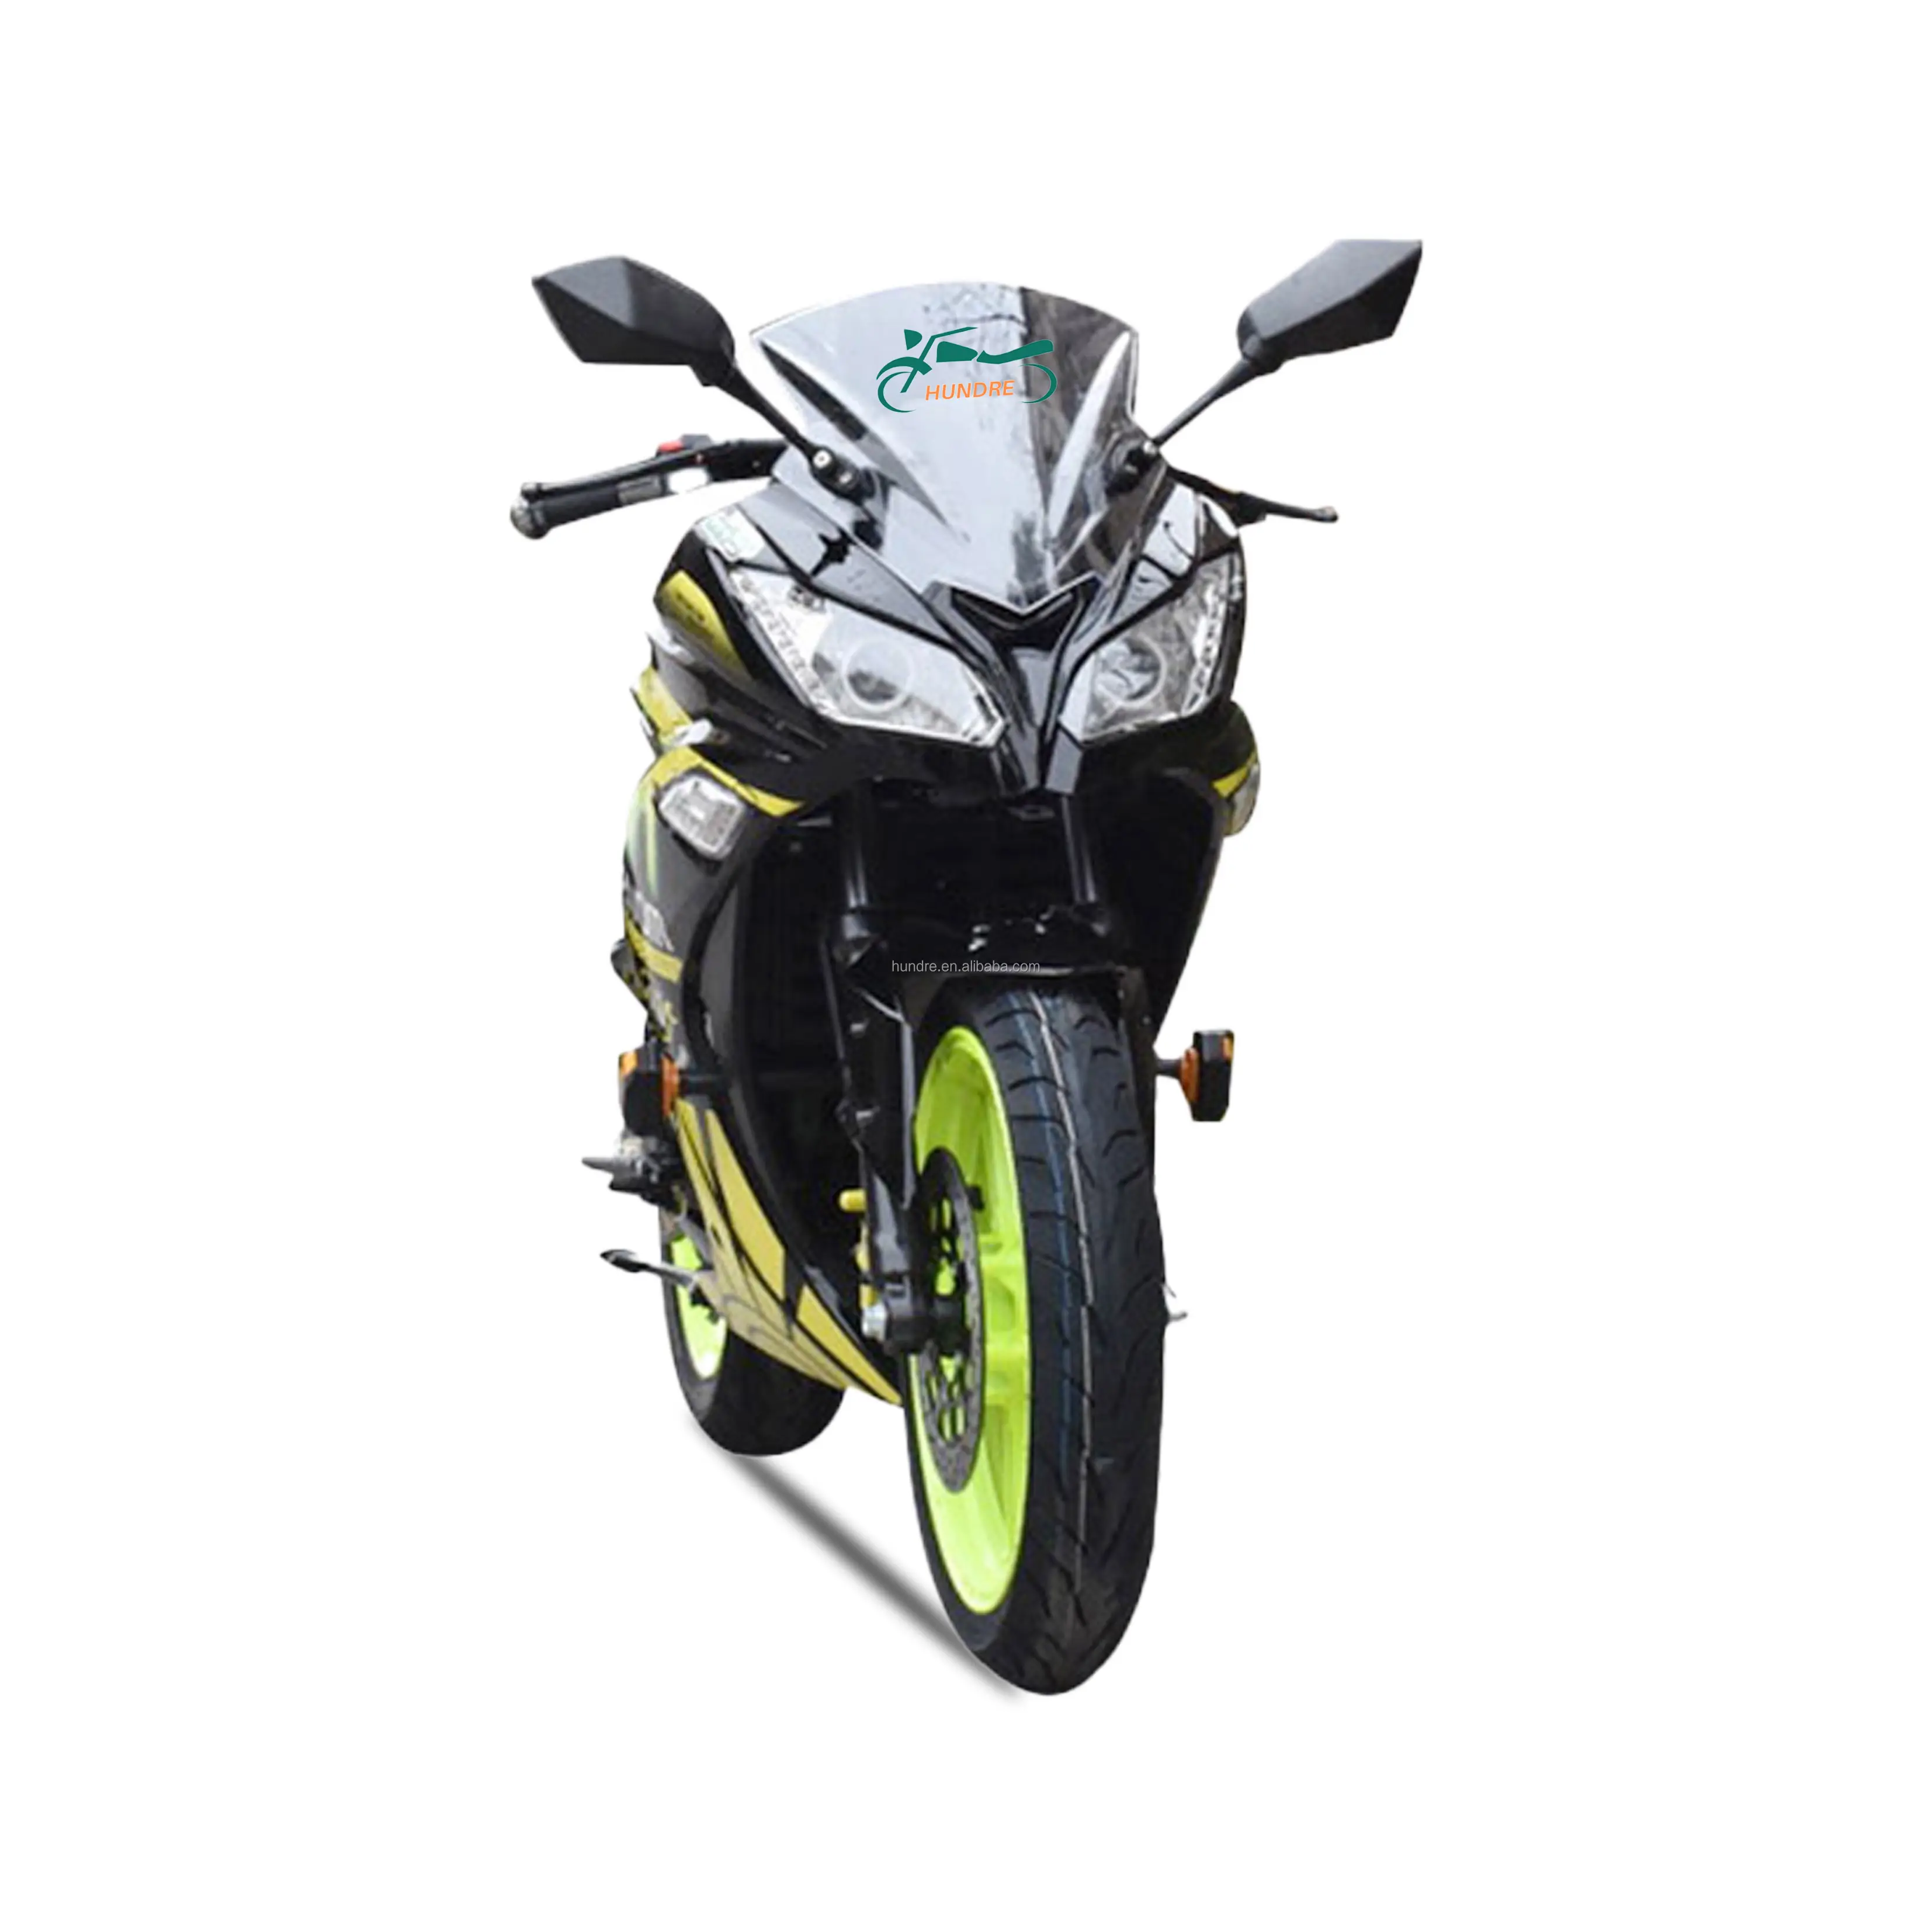 500cc Adv Motorcycle High Speed Euro V Touring motorcycles with Eec Homologation